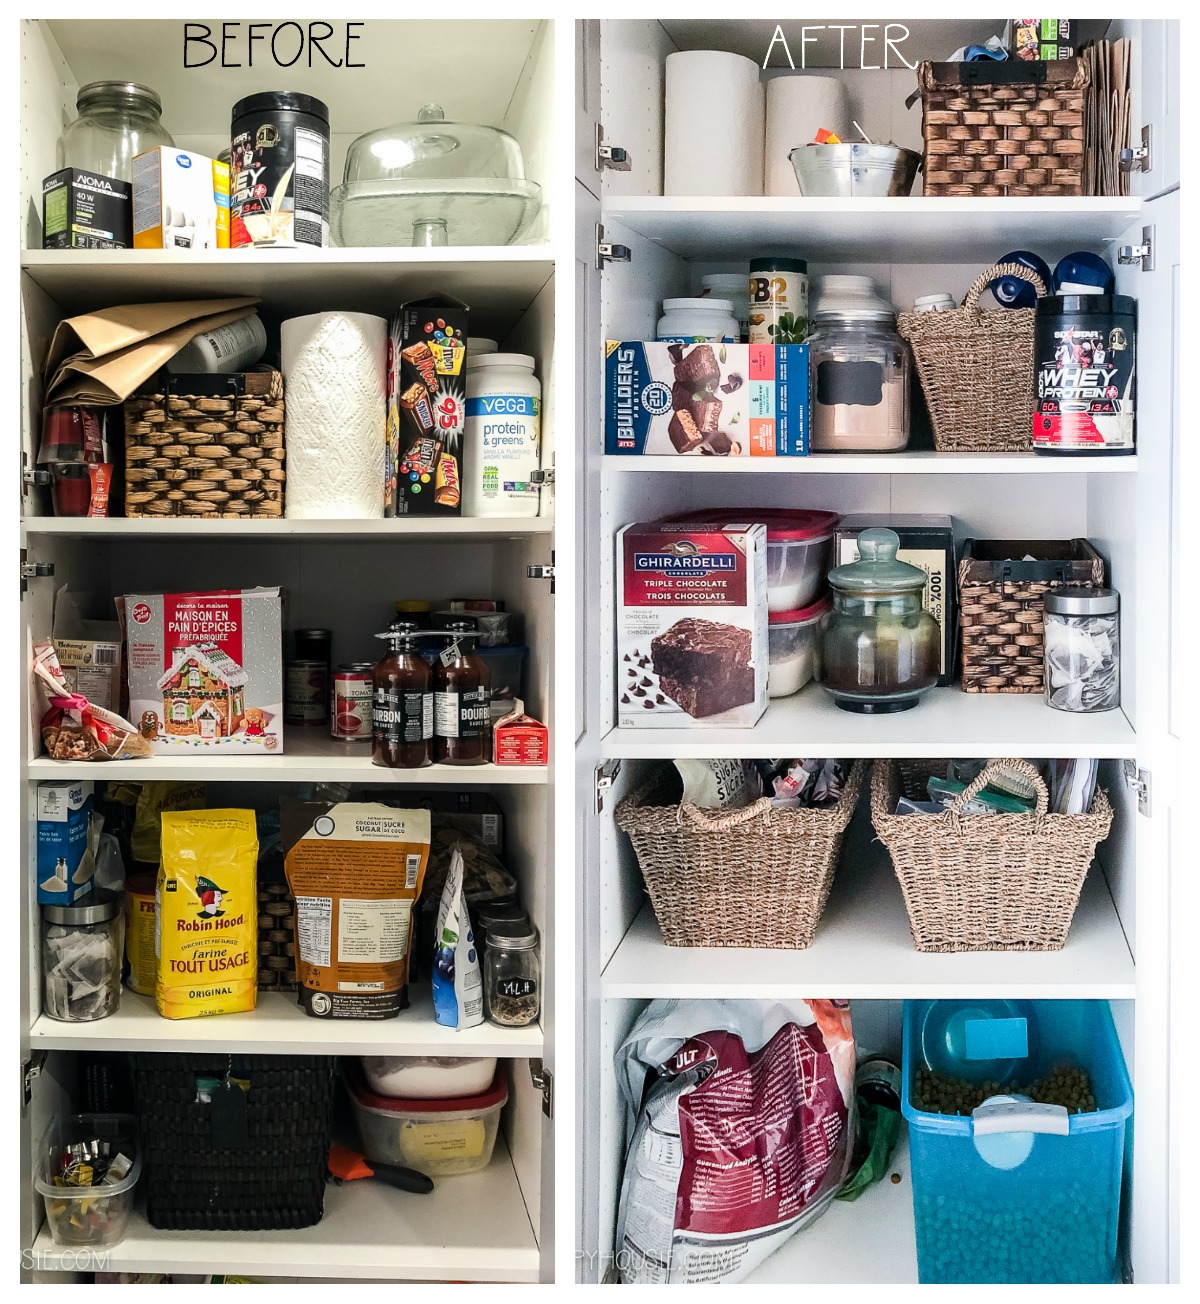 Before and after cleaned pantry.